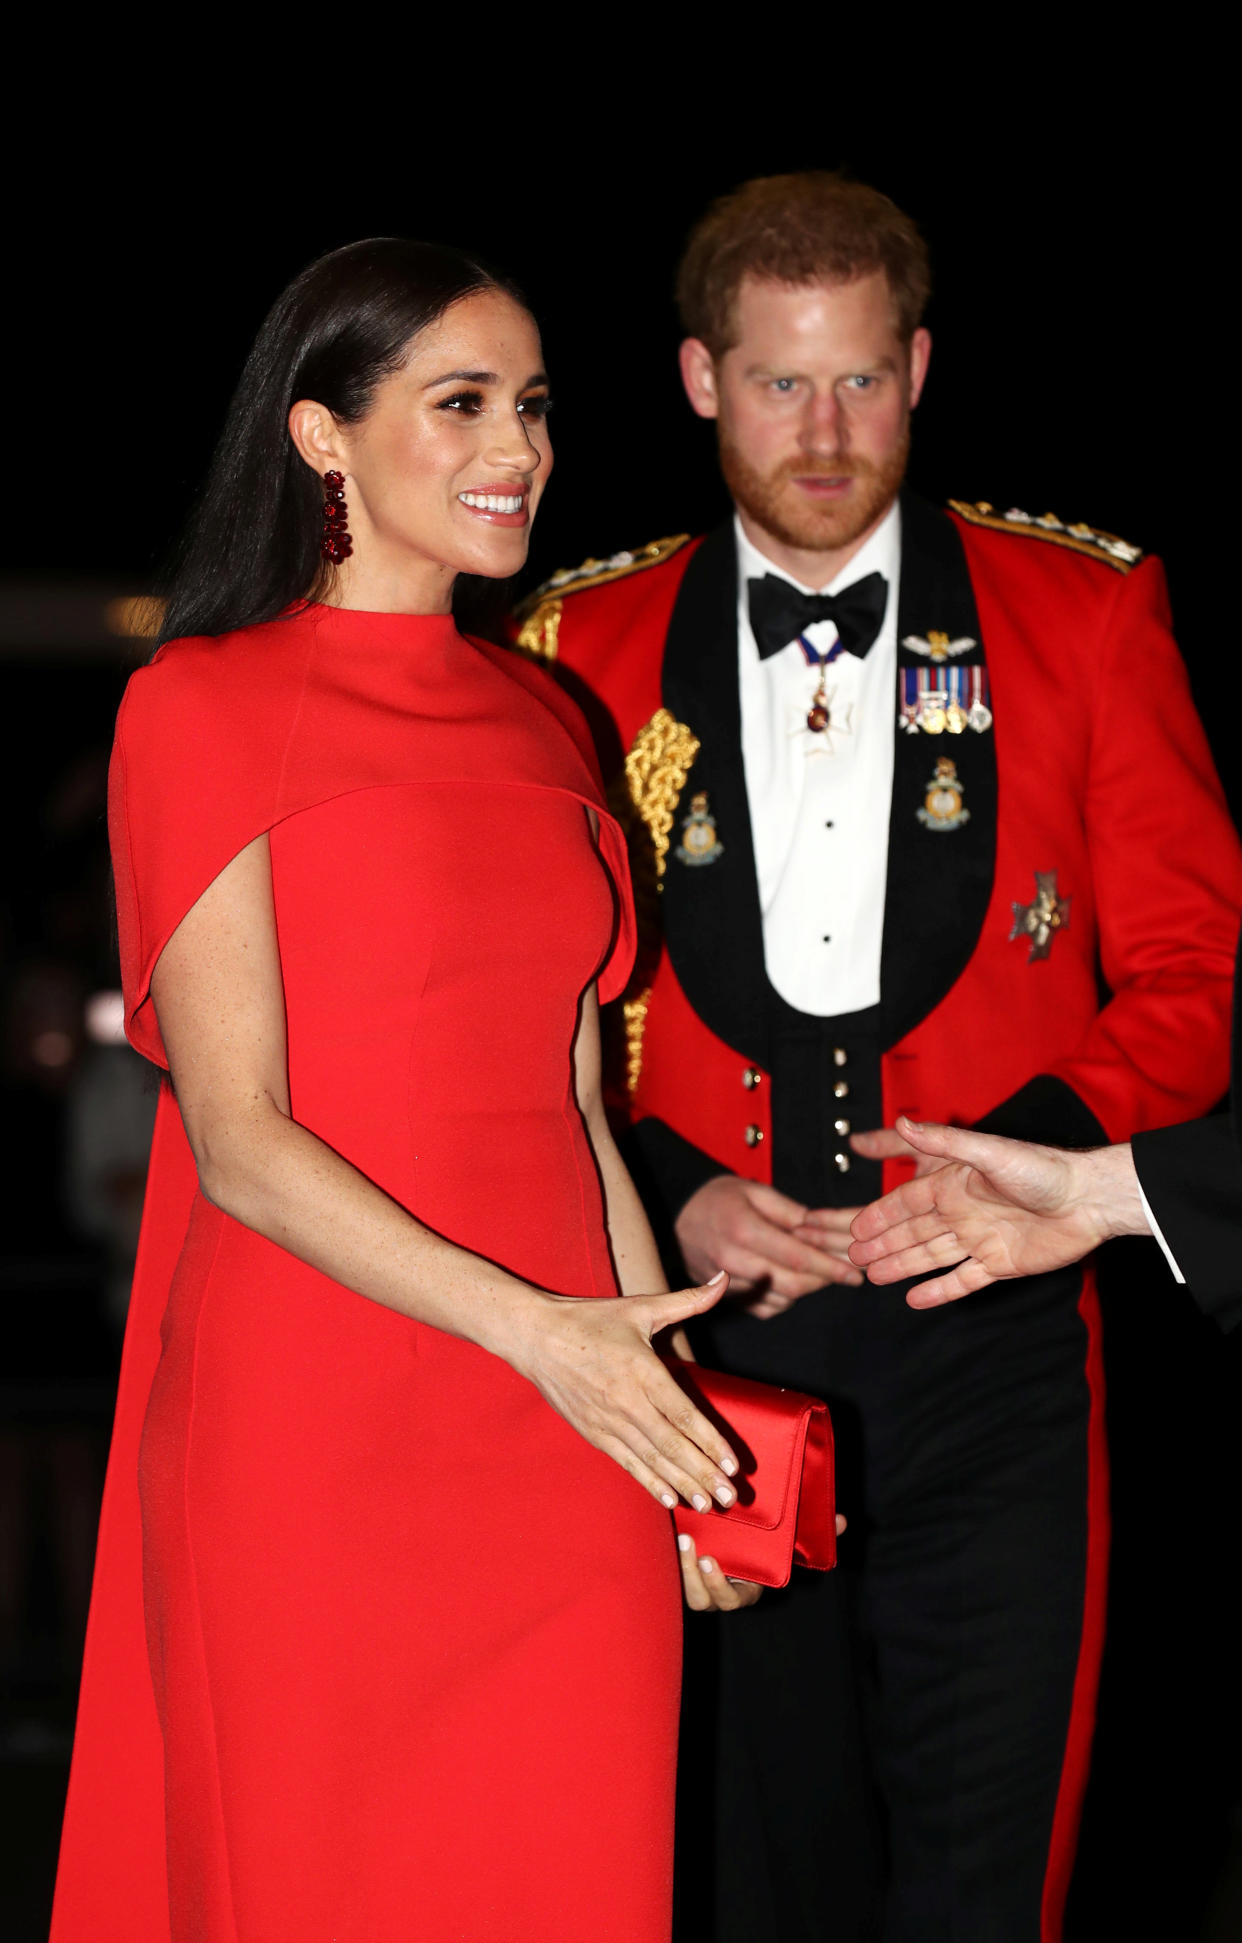 Britain's Prince Harry and his wife Meghan, arrive to attend the Mountbatten Festival of Music at the Royal Albert Hall in London, Britain March 7, 2020. REUTERS/Simon Dawson/Pool